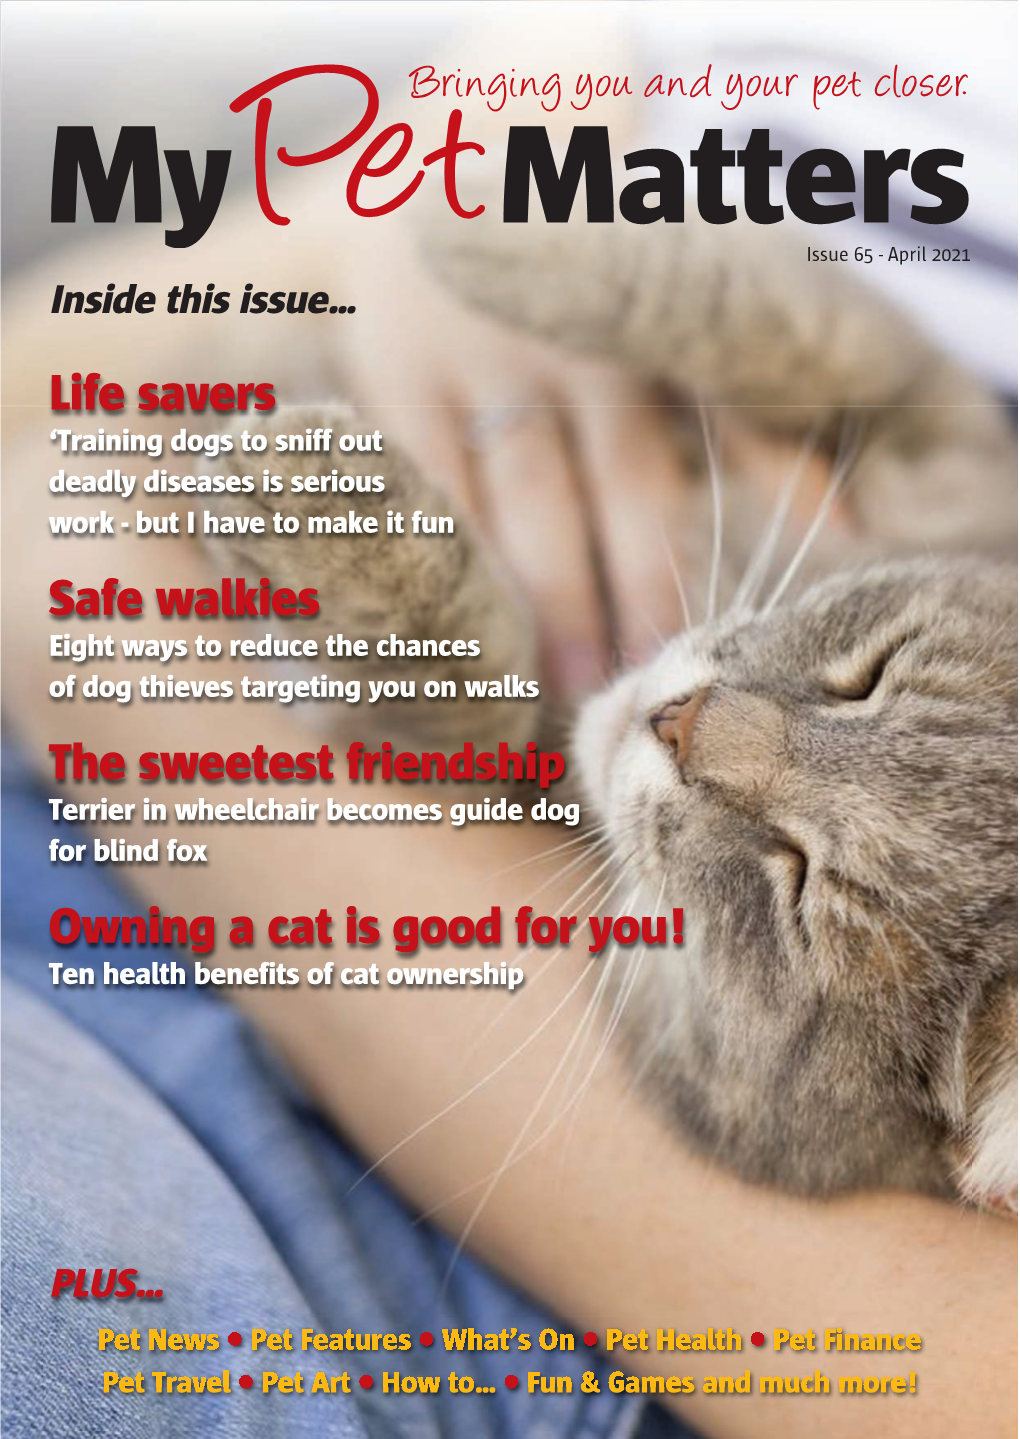 Life Savers Safe Walkies the Sweetest Friendship Owning a Cat Is Good for You!